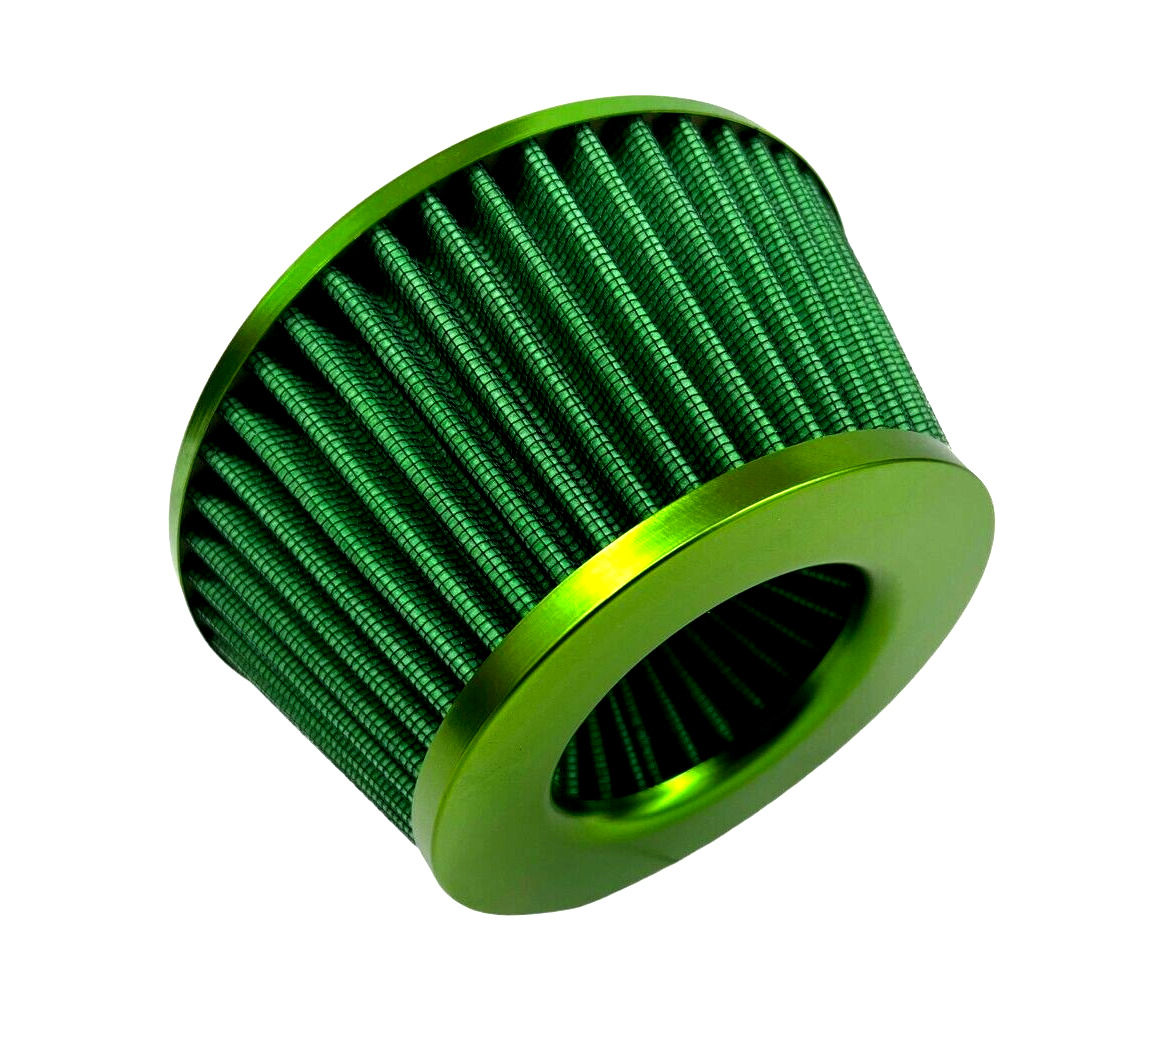 for BMW M5 F10 Air Filter Cone Adjustable 3 3.5 4 inch inlet High Flow GREEN